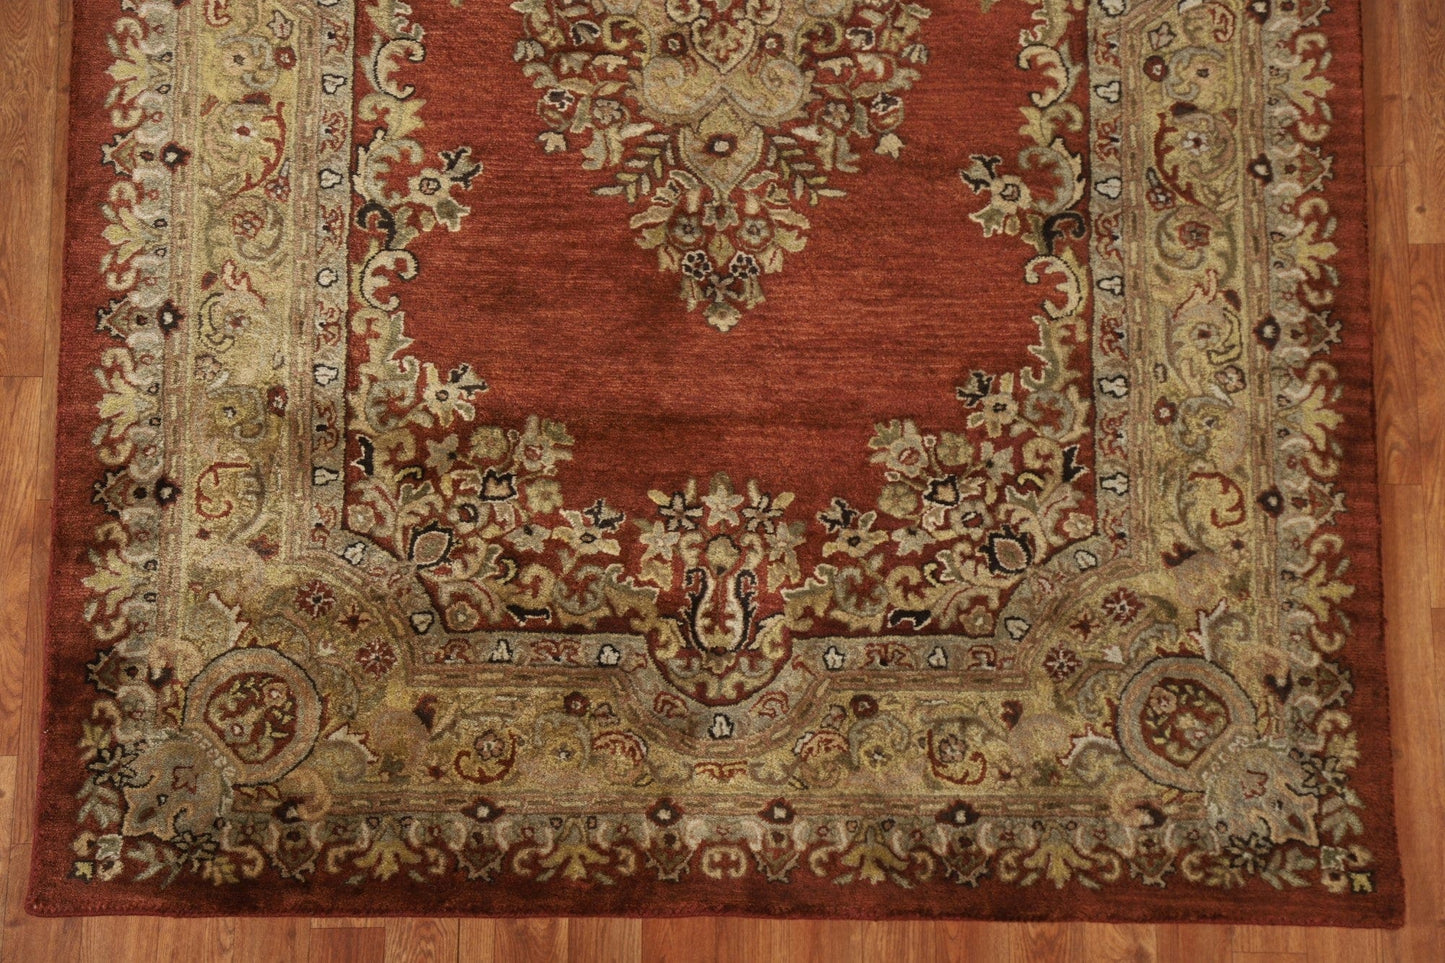 Hand-Tufted Wool Aubusson Indian Rug 5x8